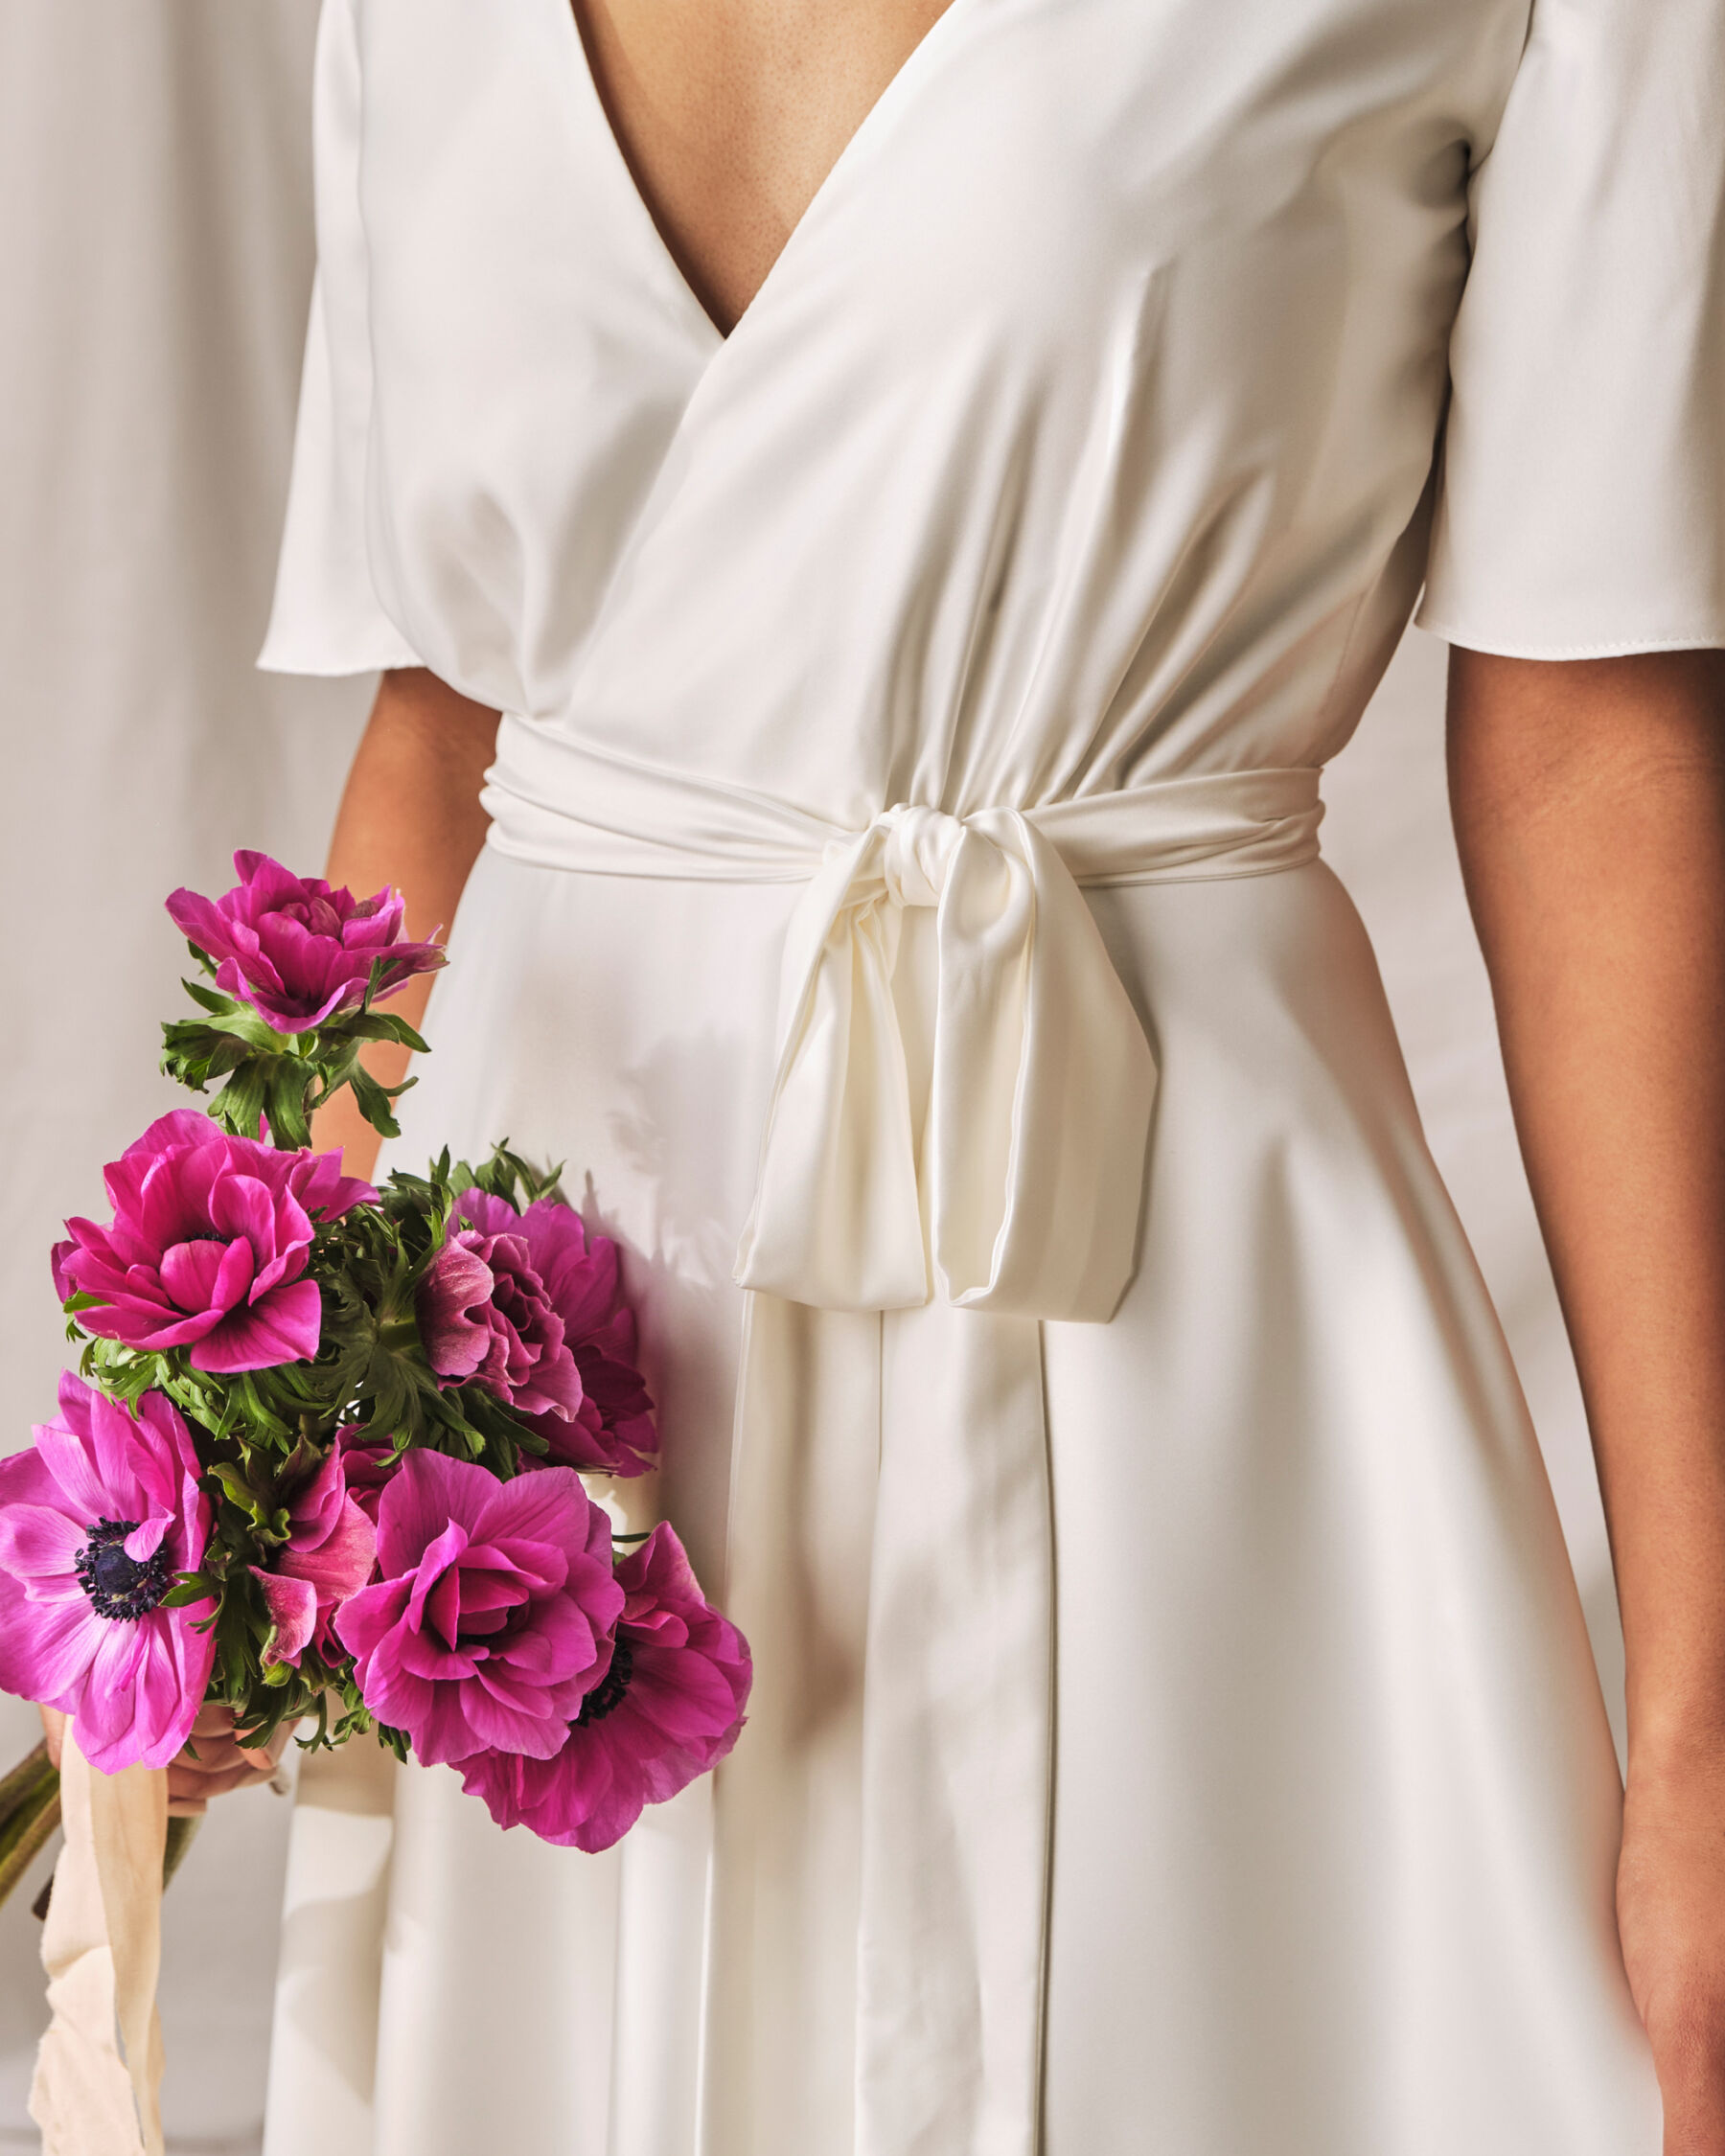 Modern, sustainable, simple wrap wedding dress by Sophie Rose Bridal.